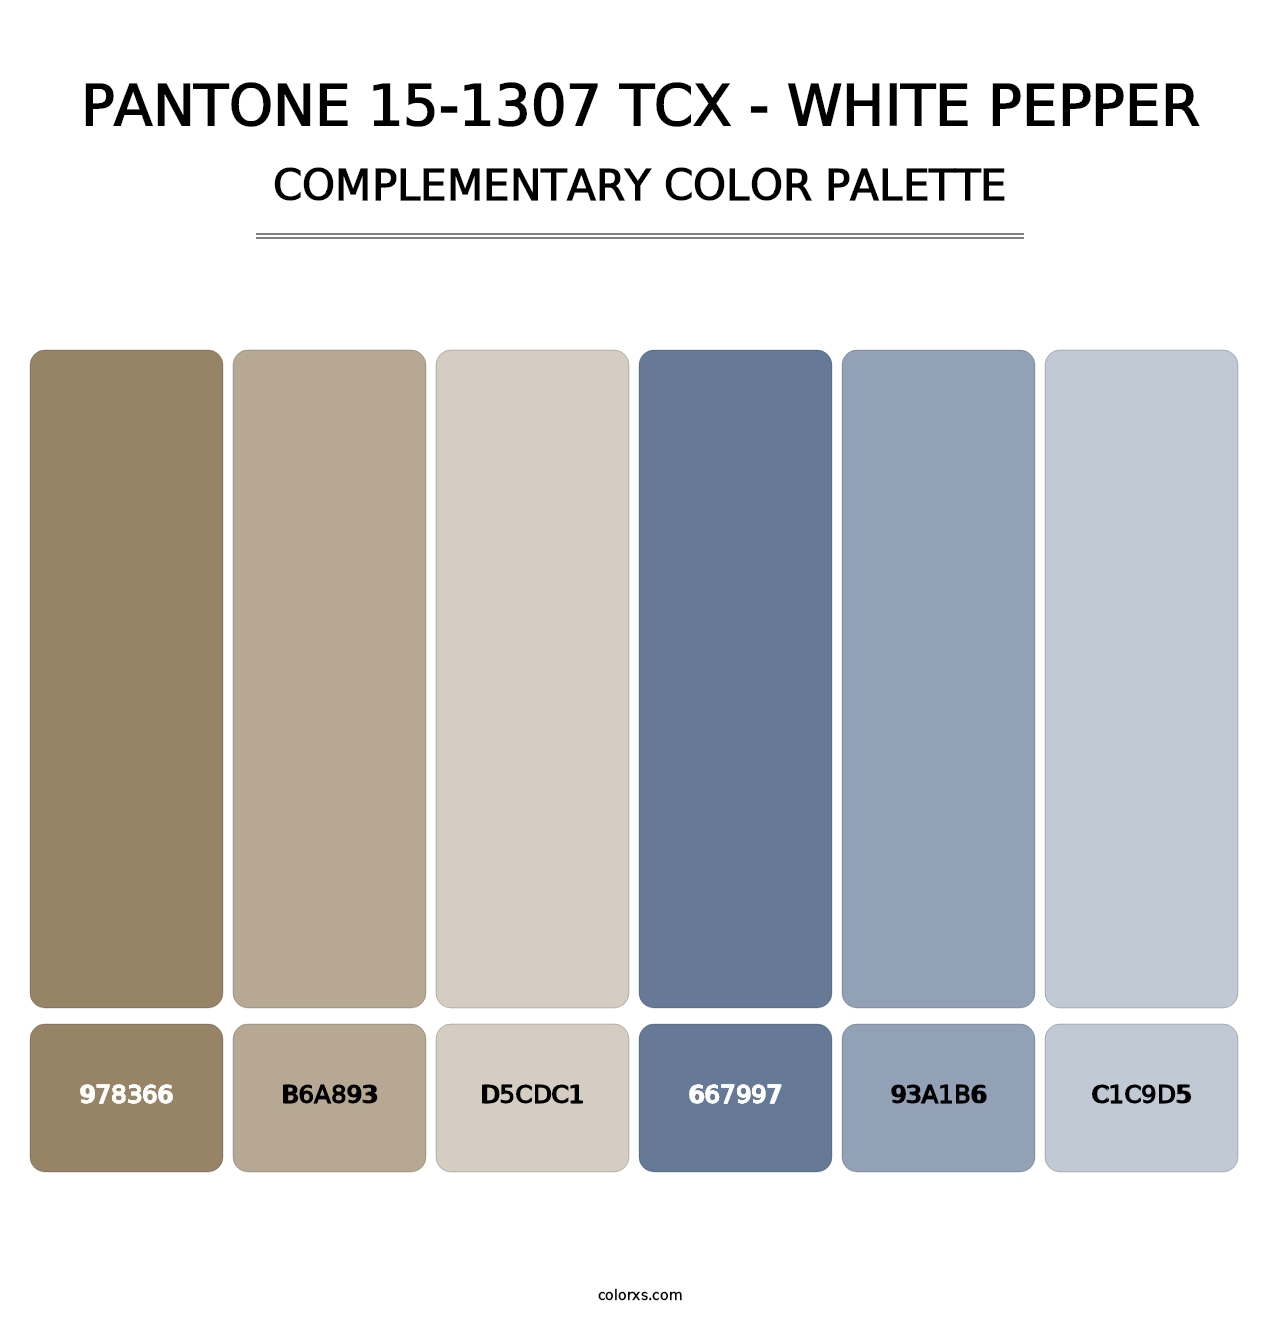 PANTONE 15-1307 TCX - White Pepper - Complementary Color Palette